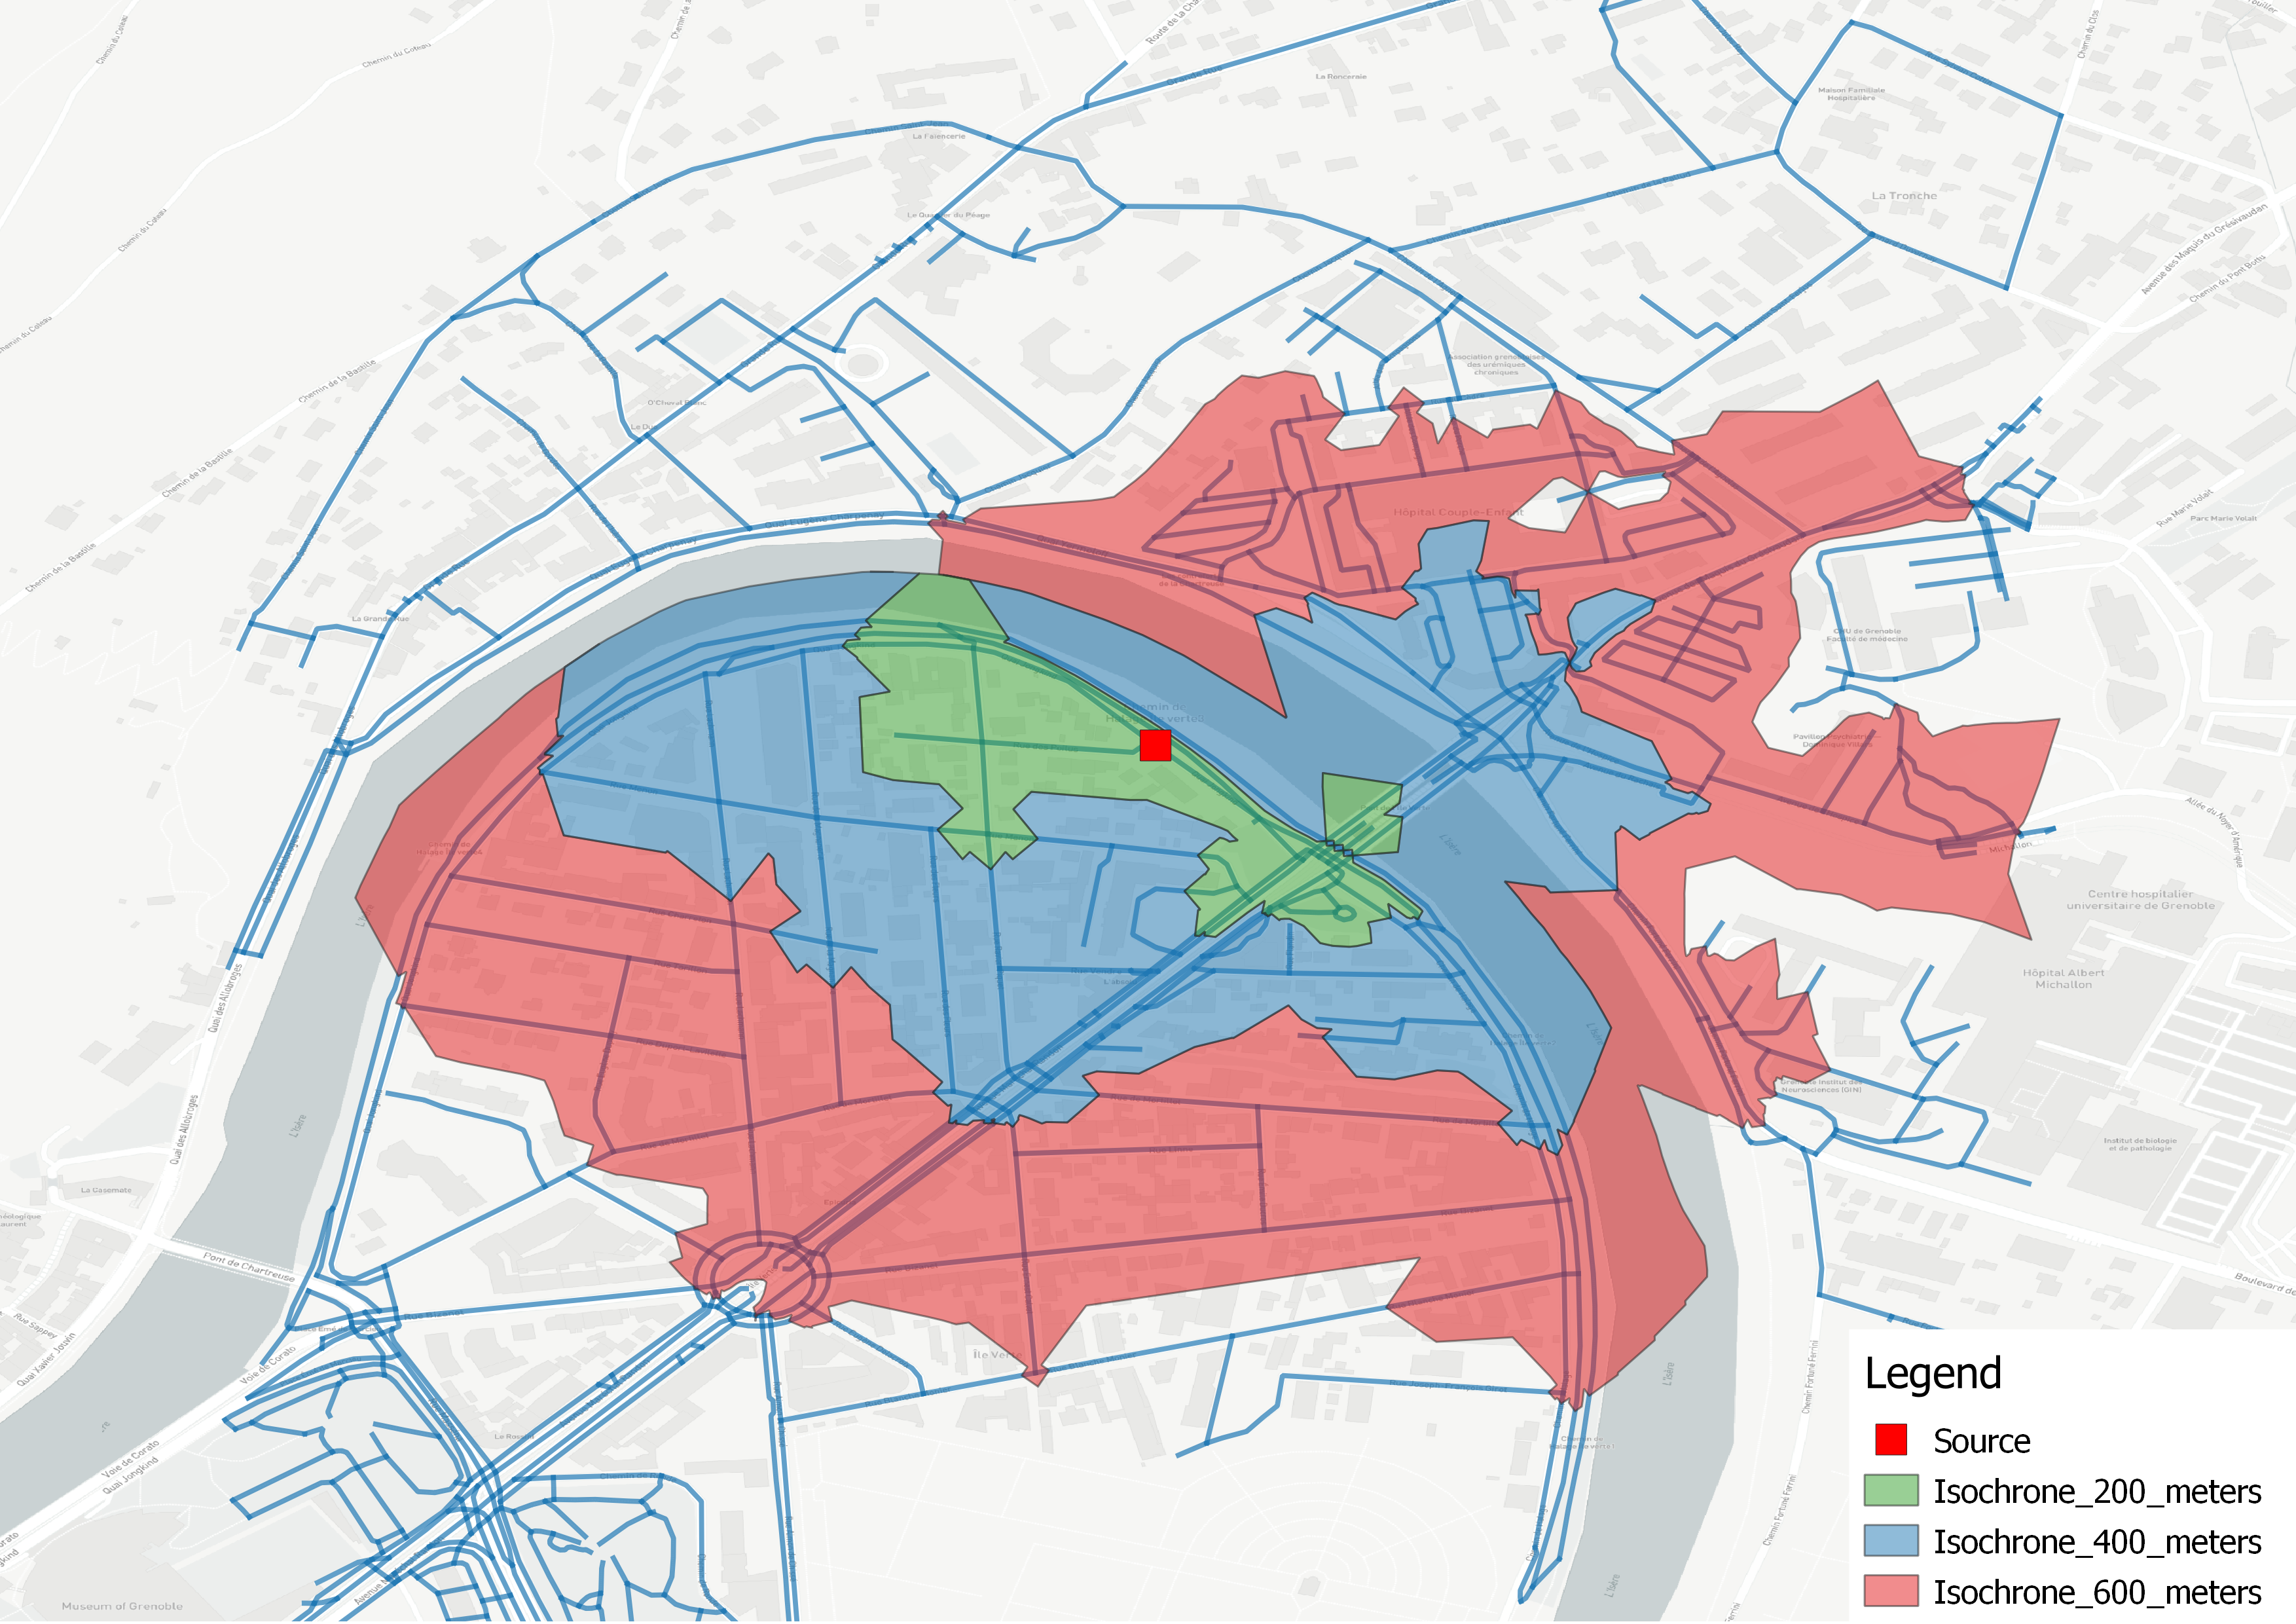 _images/Isochrone_example.png